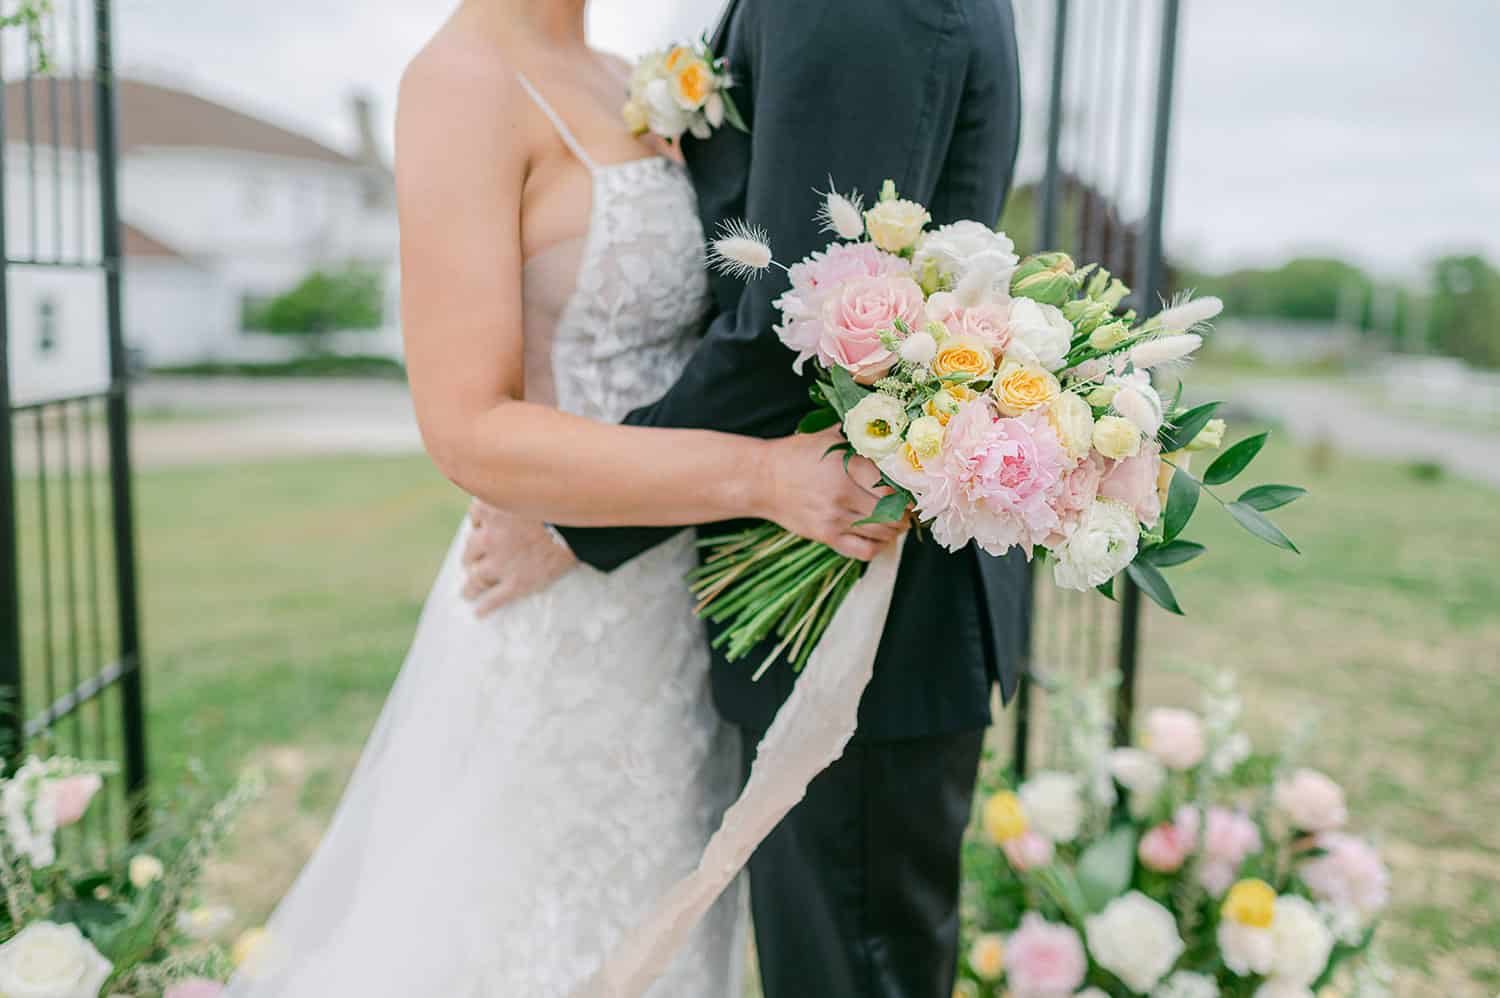 Bride and groom holding a bouquet of pastel flowers, close-up with a soft focus background in a garden setting.